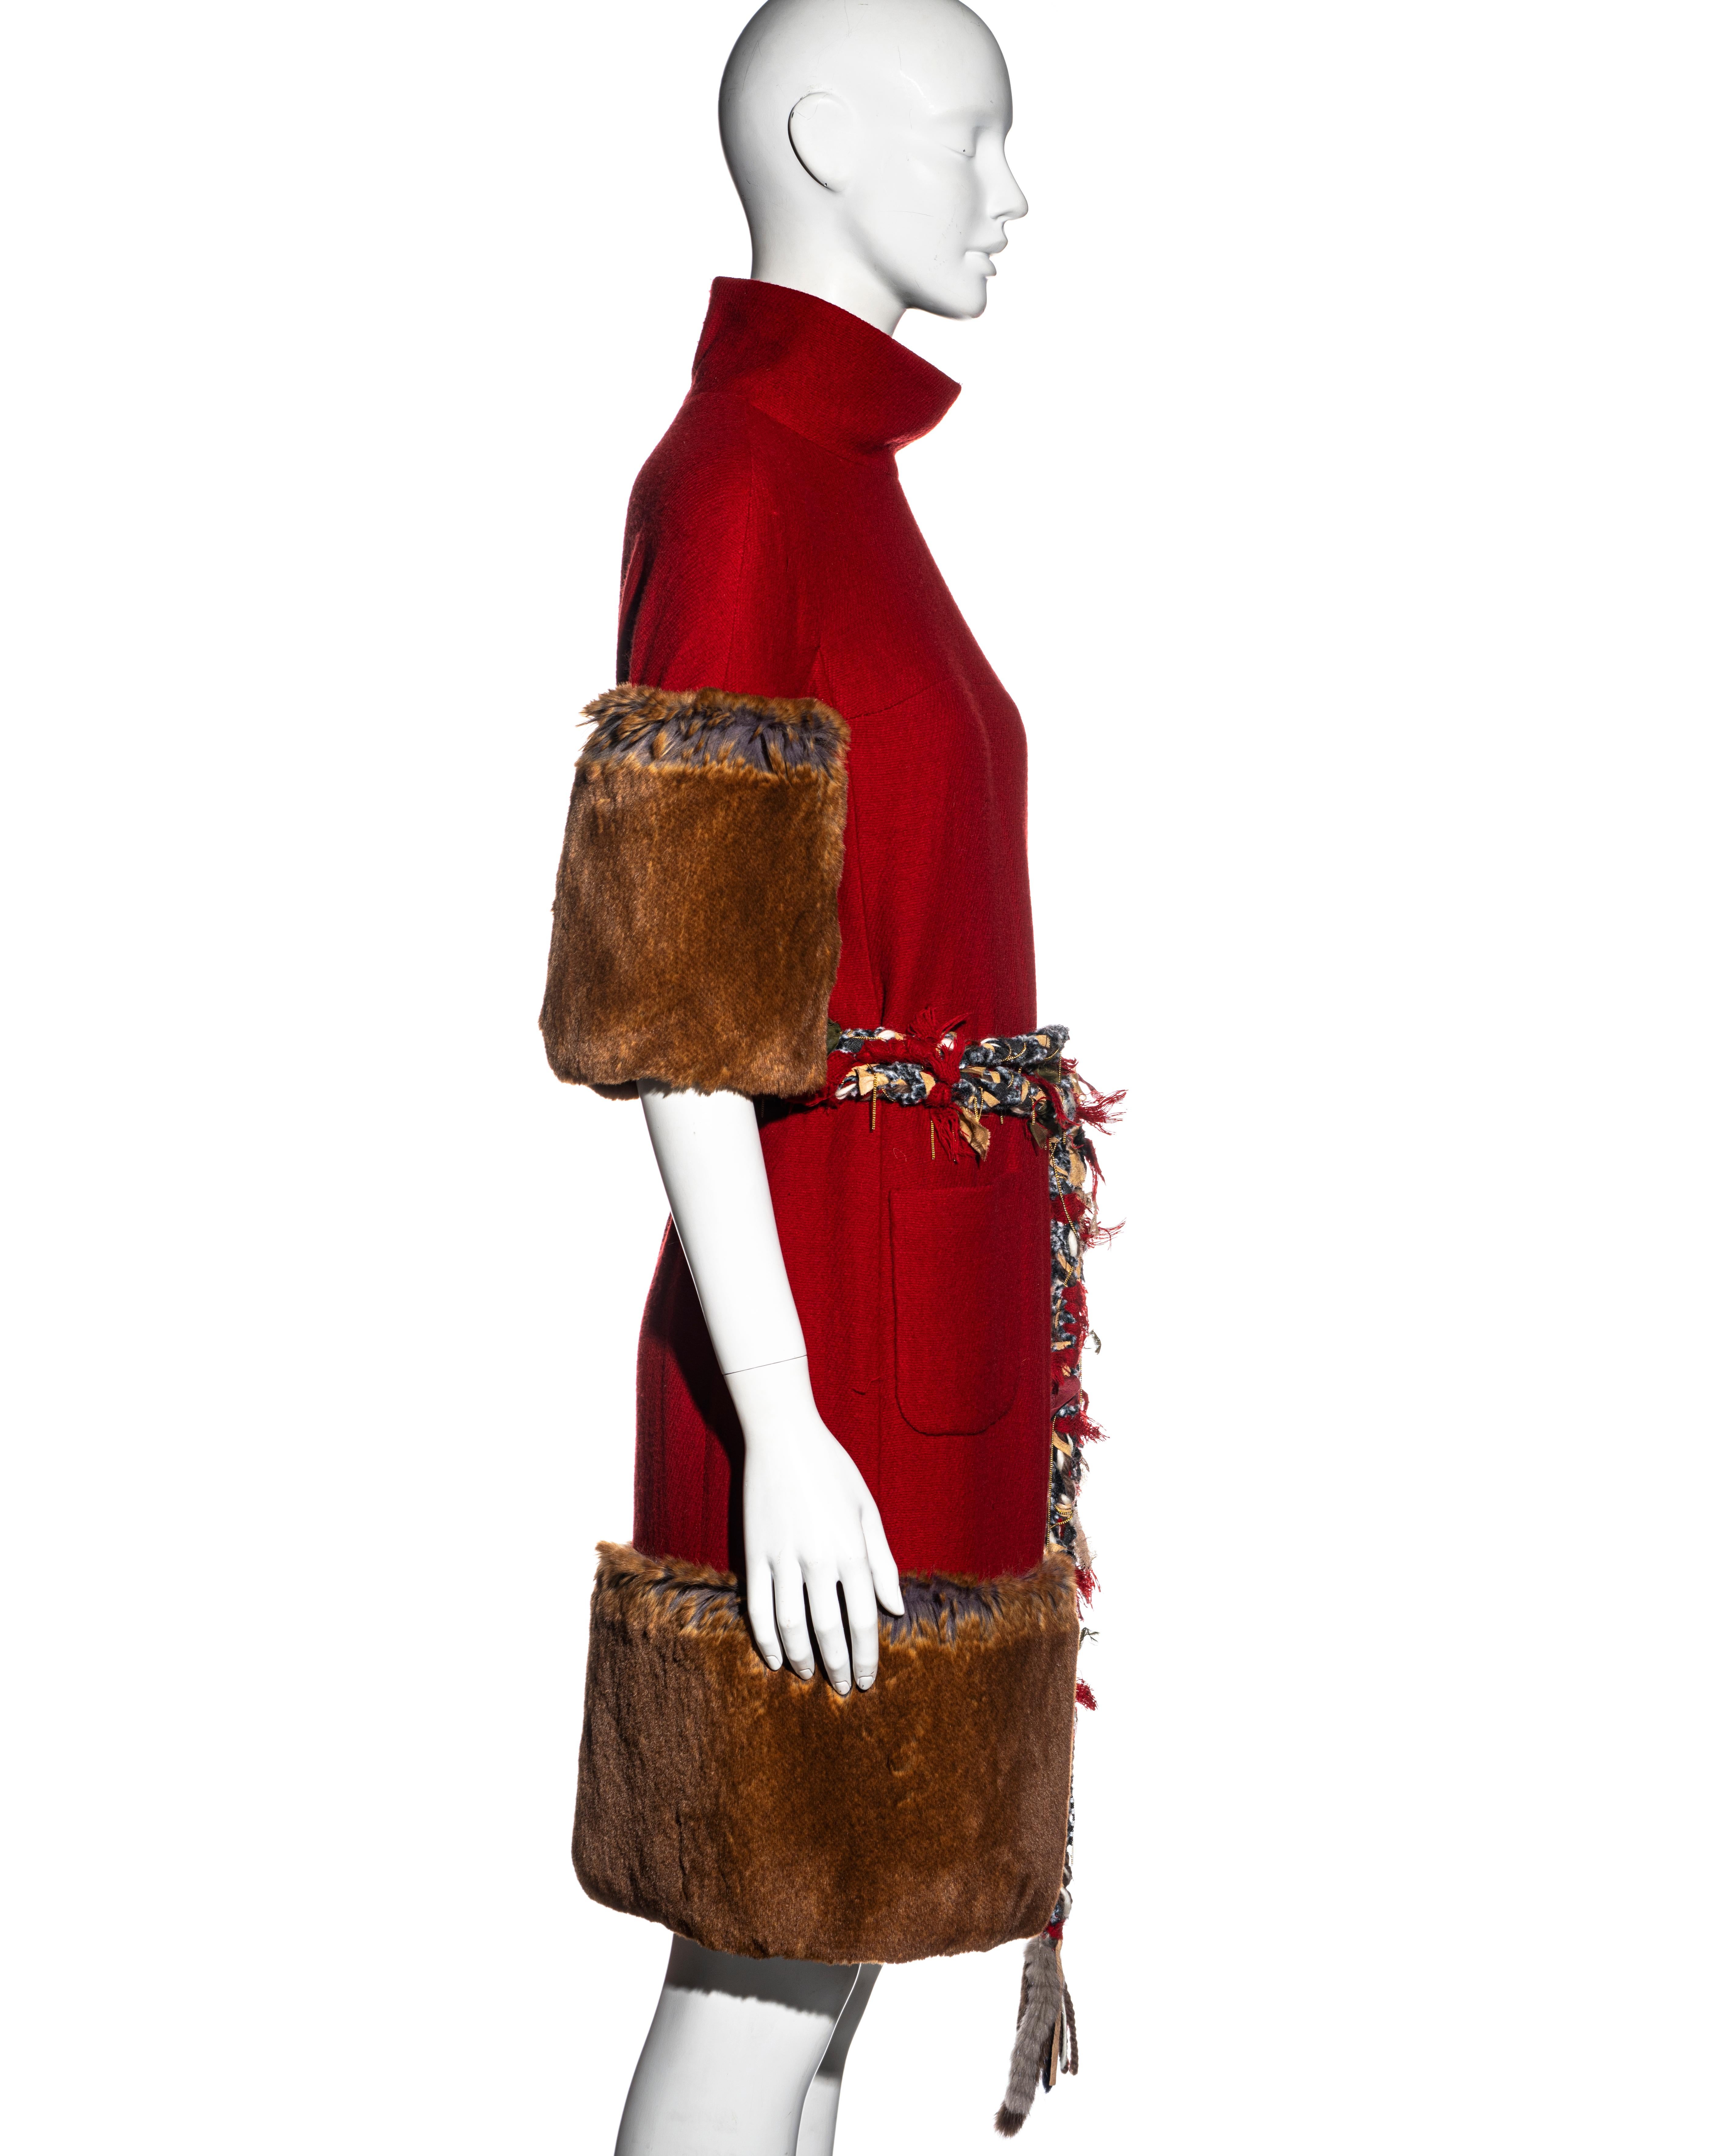 Chanel by Karl Lagerfeld red cashmere wool and faux fur dress, fw 2010 For Sale 1